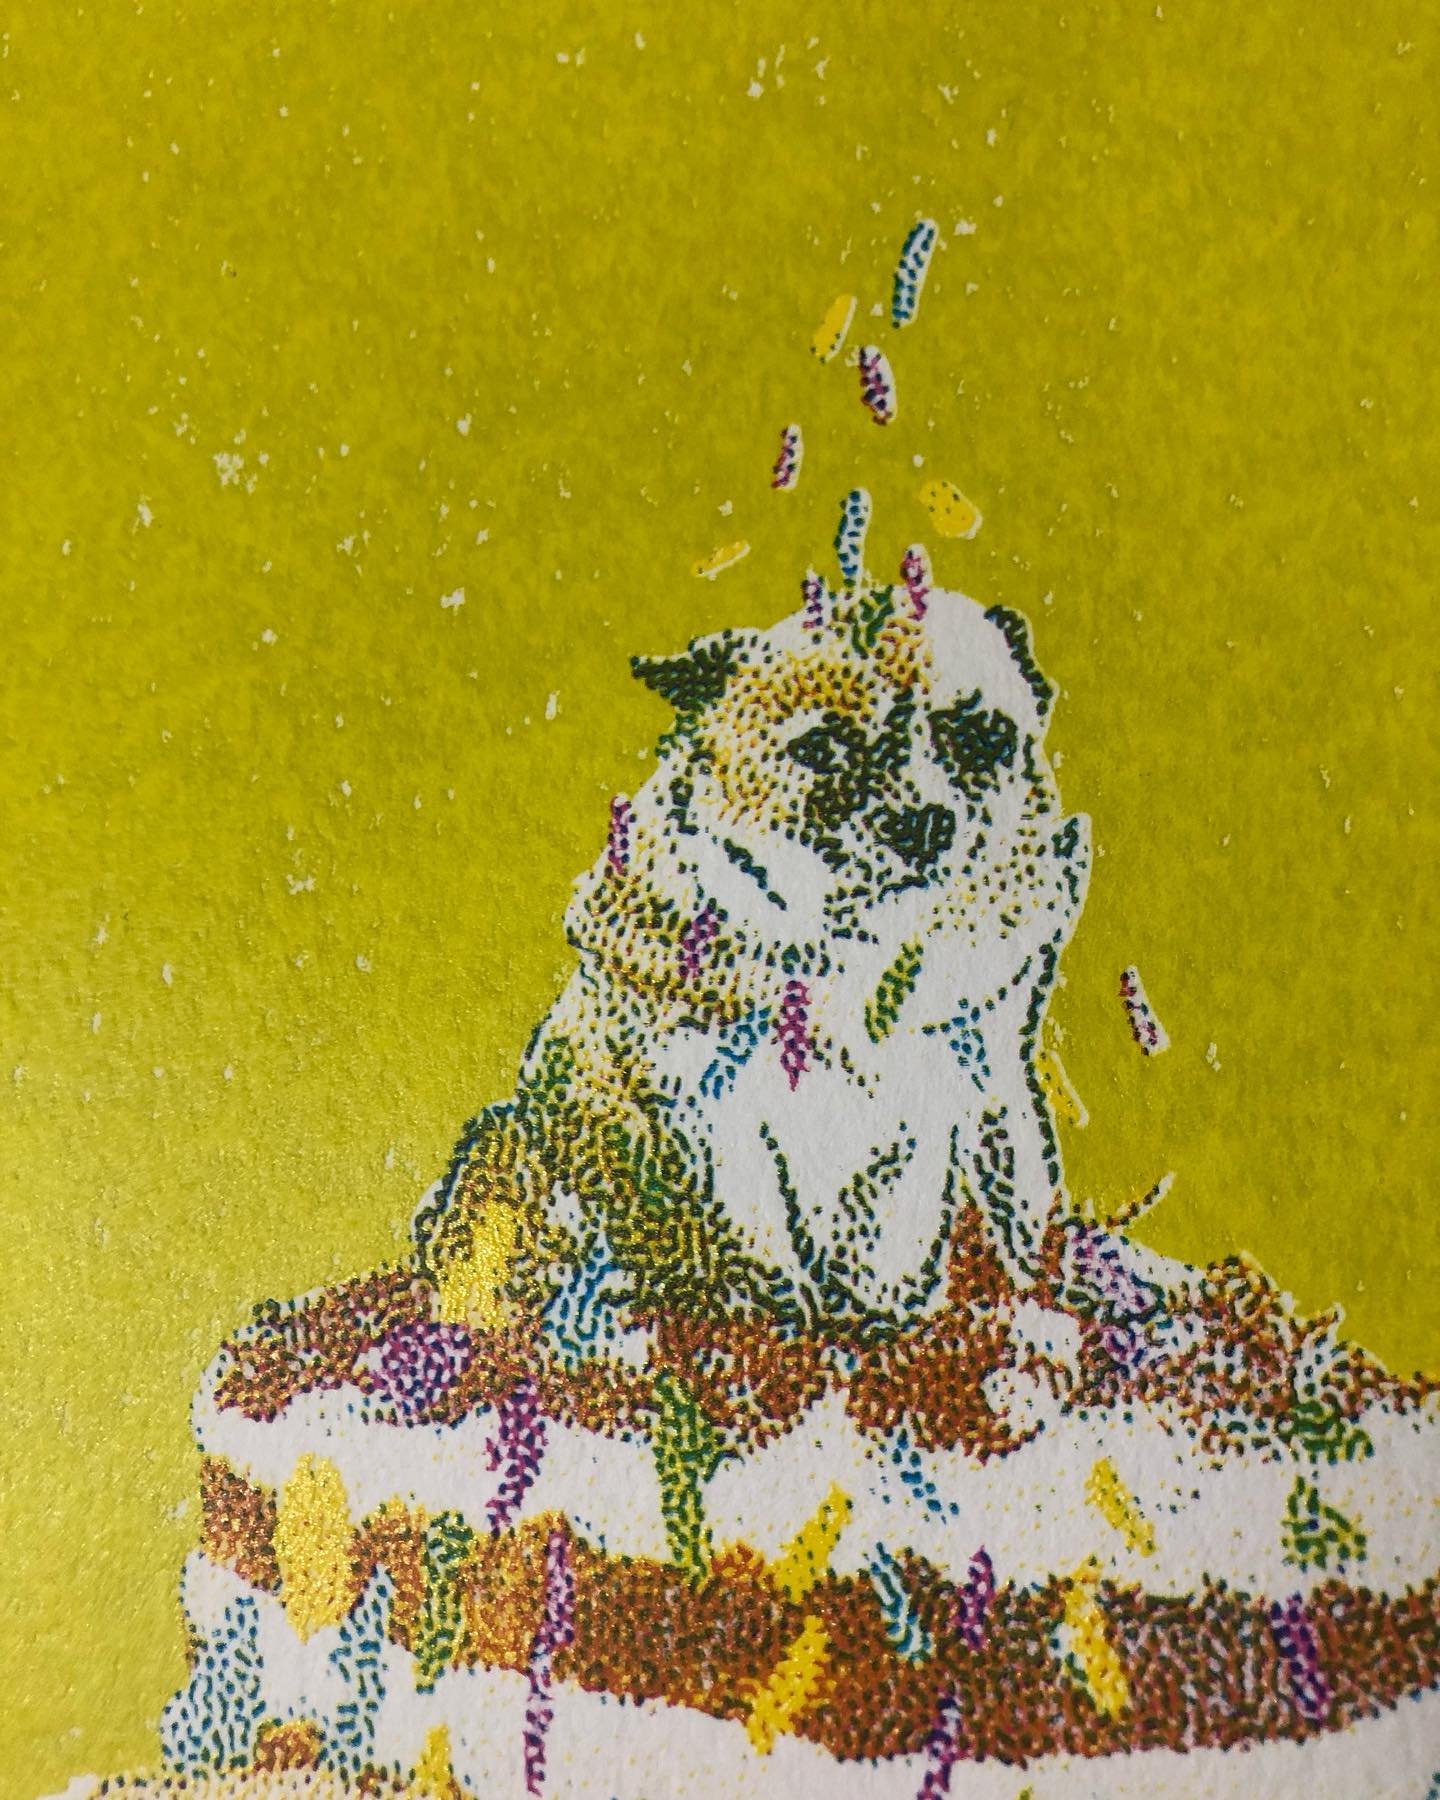 New 5 layer CMYK print coming very soon to your eyes 👀 from @glomoth &amp; @dingle_community_print 💖🔜🐩✨🍰🐕 #cakedog xx